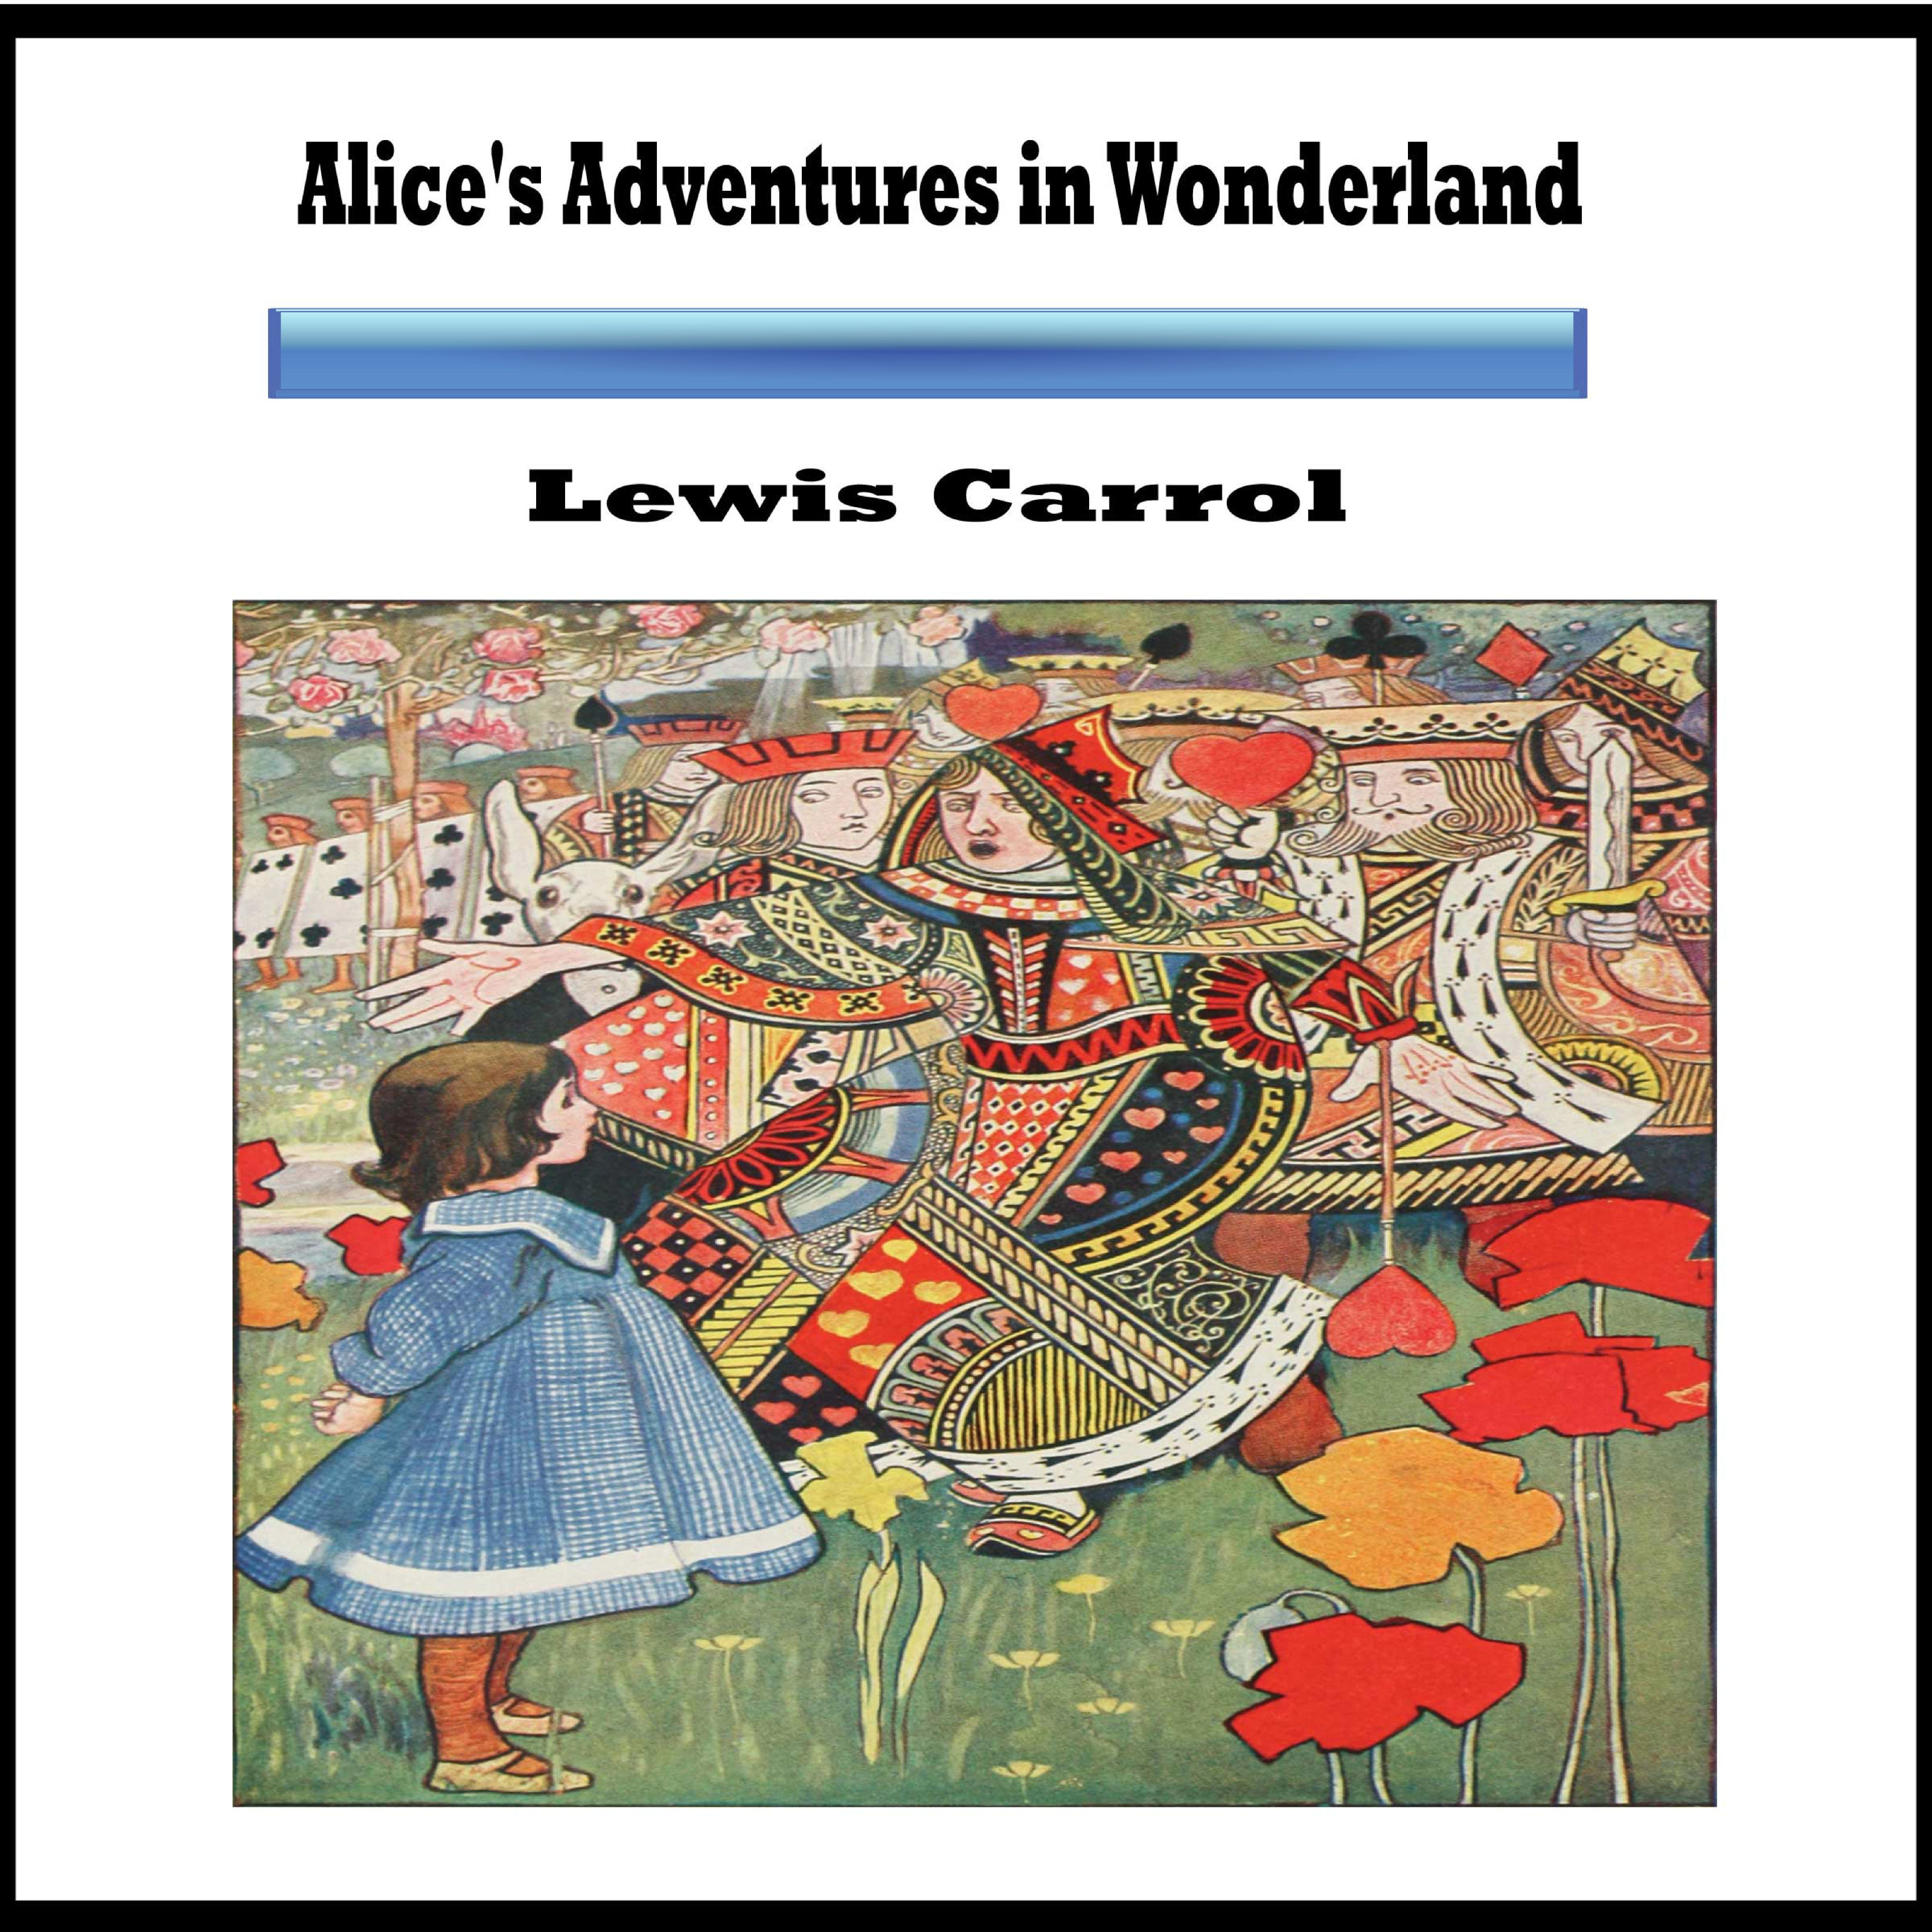 Lewis Carroll: Alice's Adventures in Wonderland, Chapter 7: A Mad Tea-Party